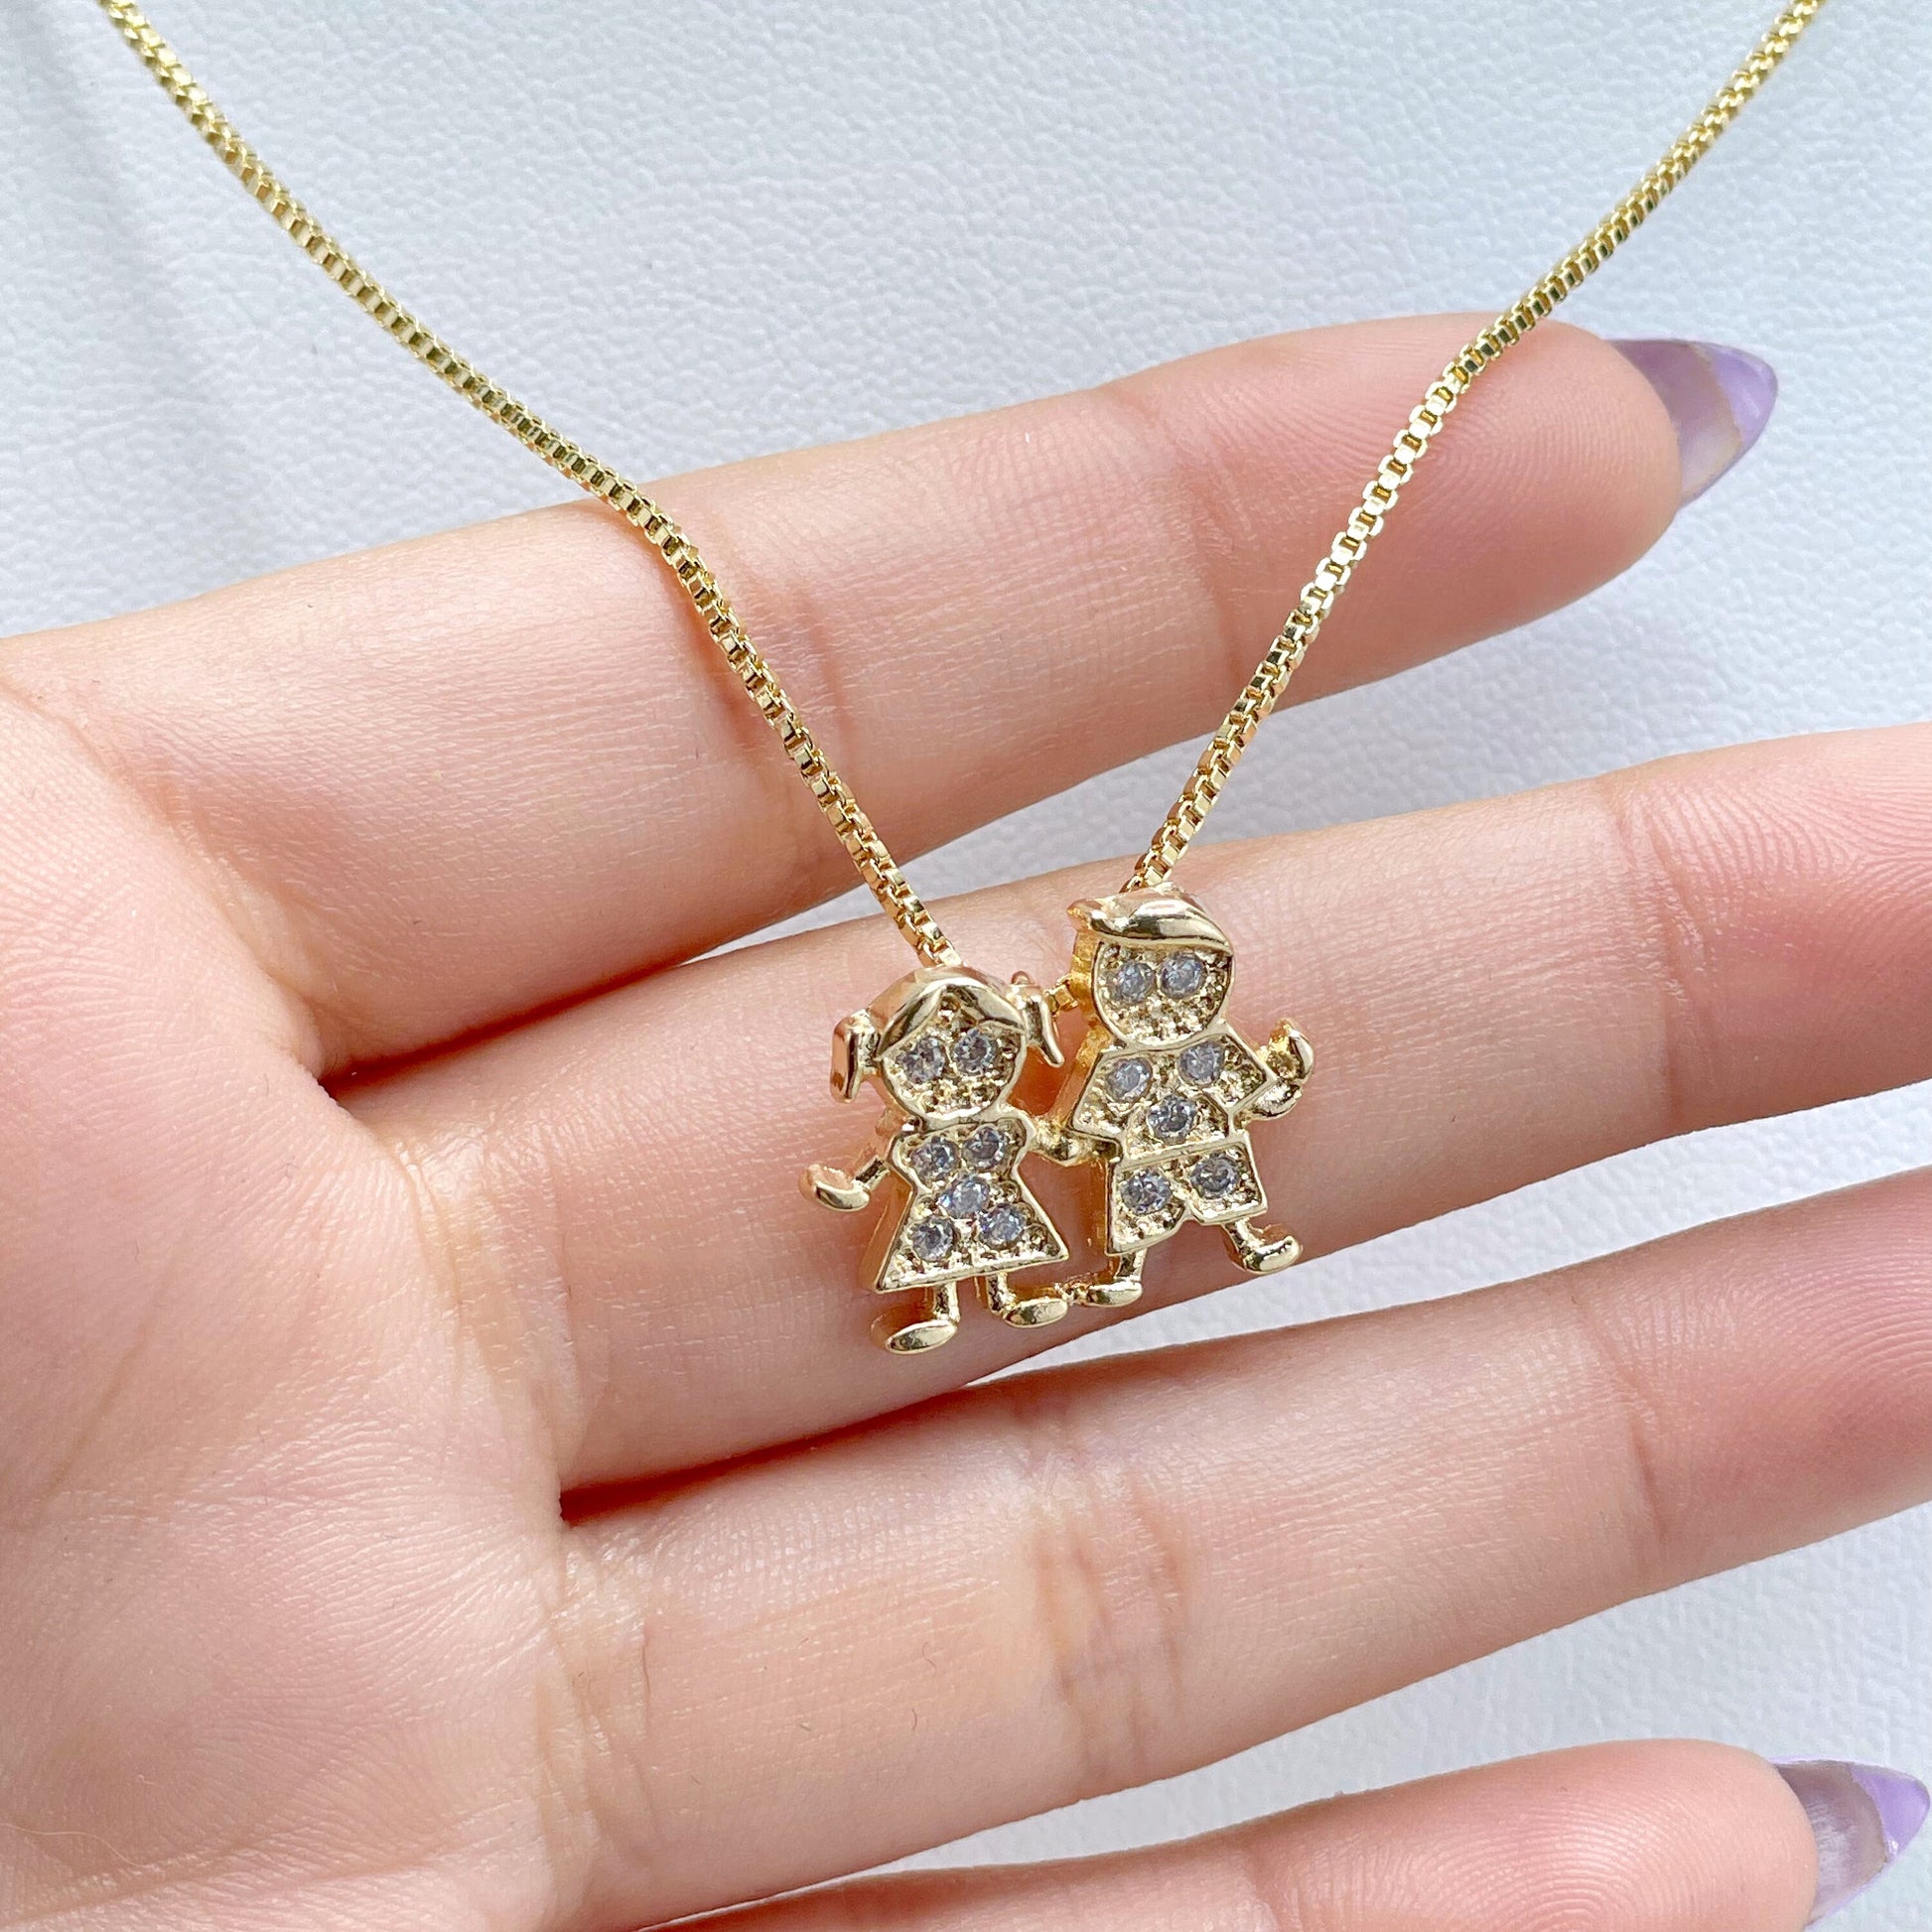 18k Gold Filled 1mm Box Chain Two Kids, Girl and Boy Holding Hands Charm Necklace  Wholesale Jewelry Supplies